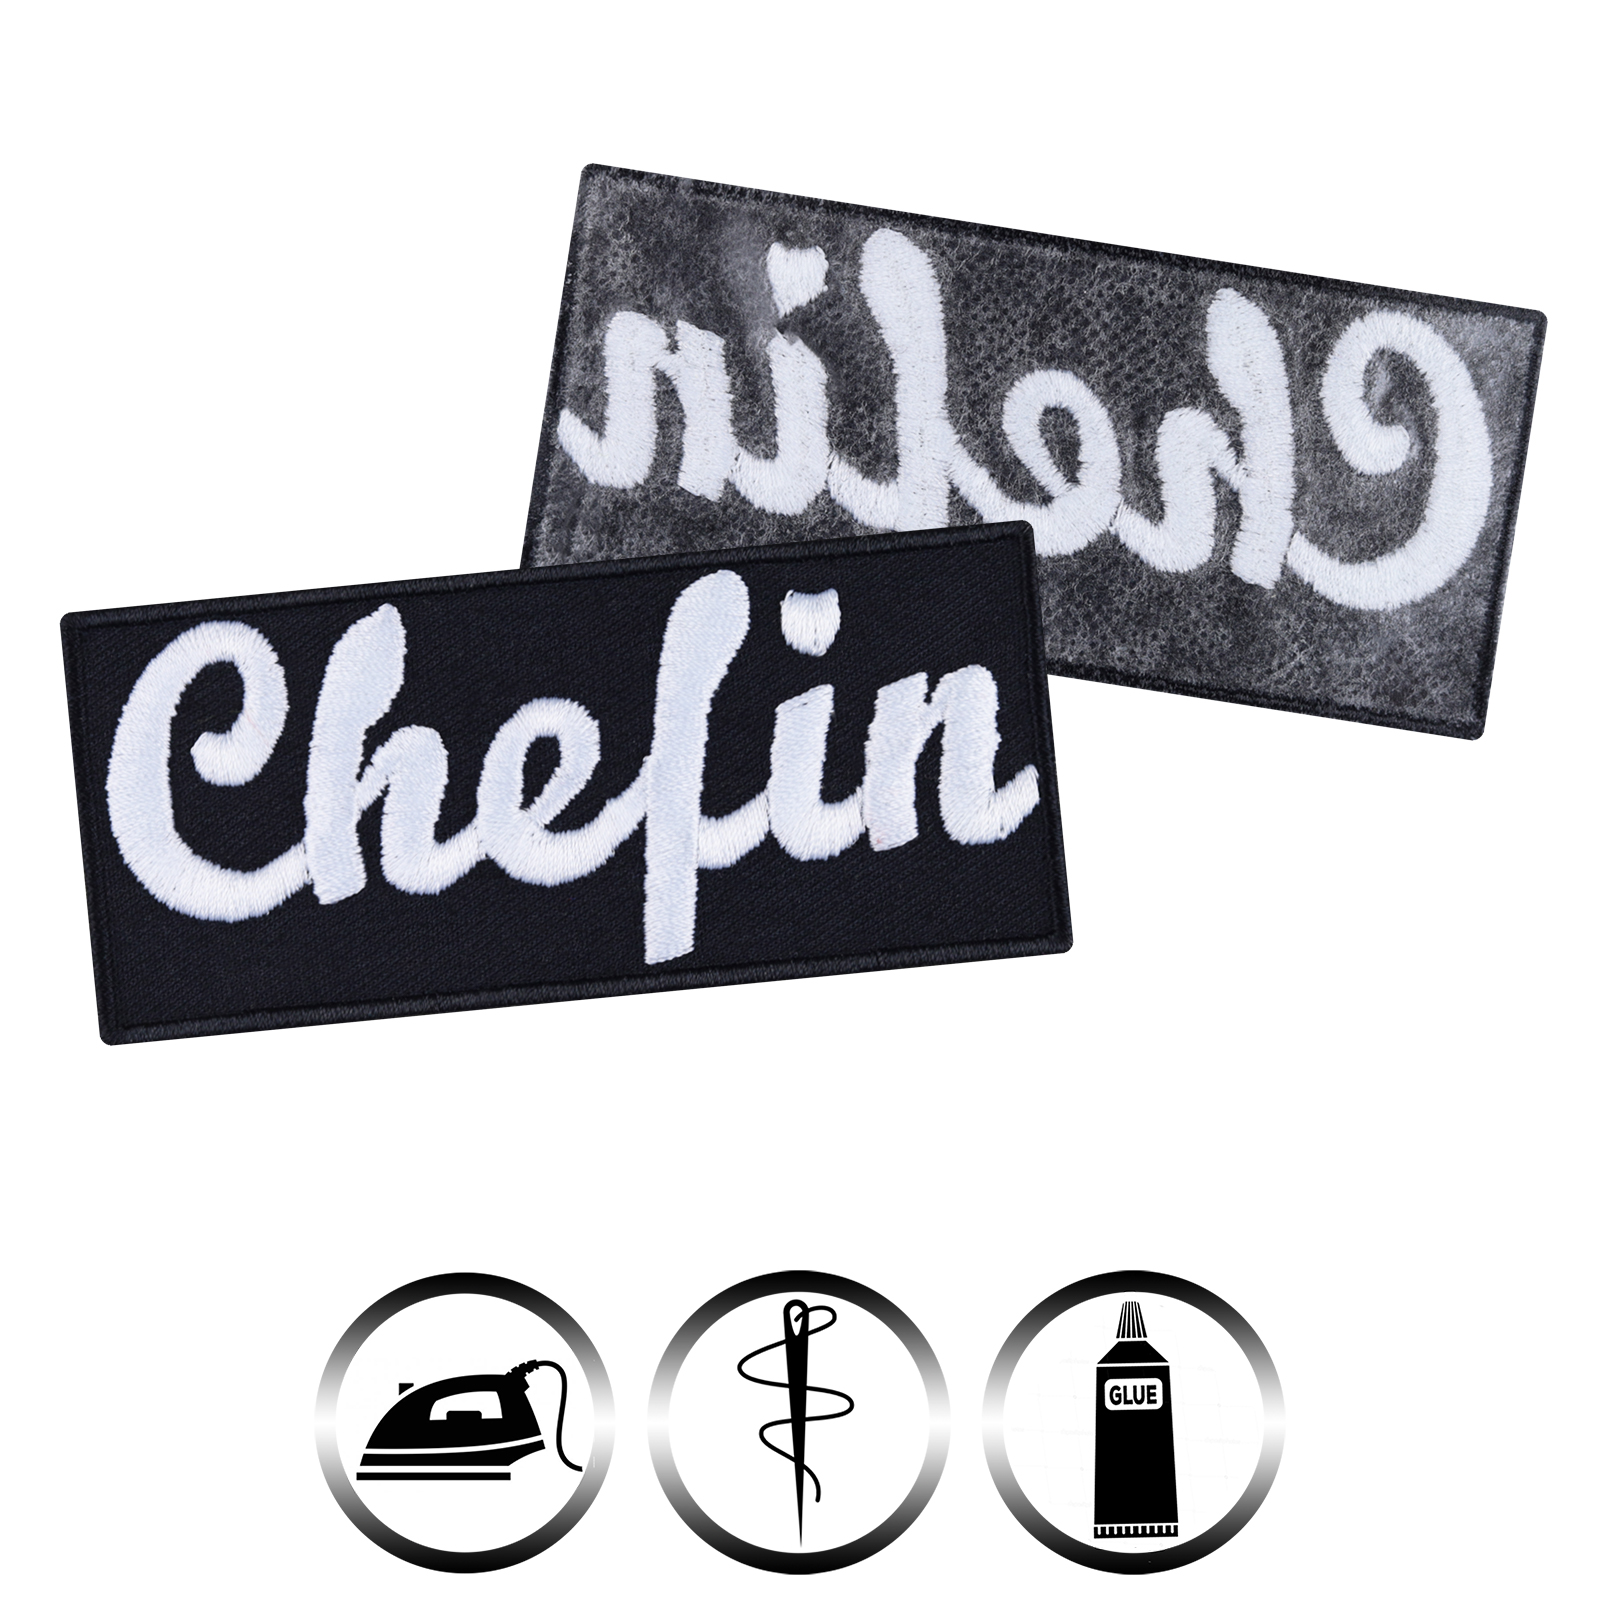 Chefin - Patch